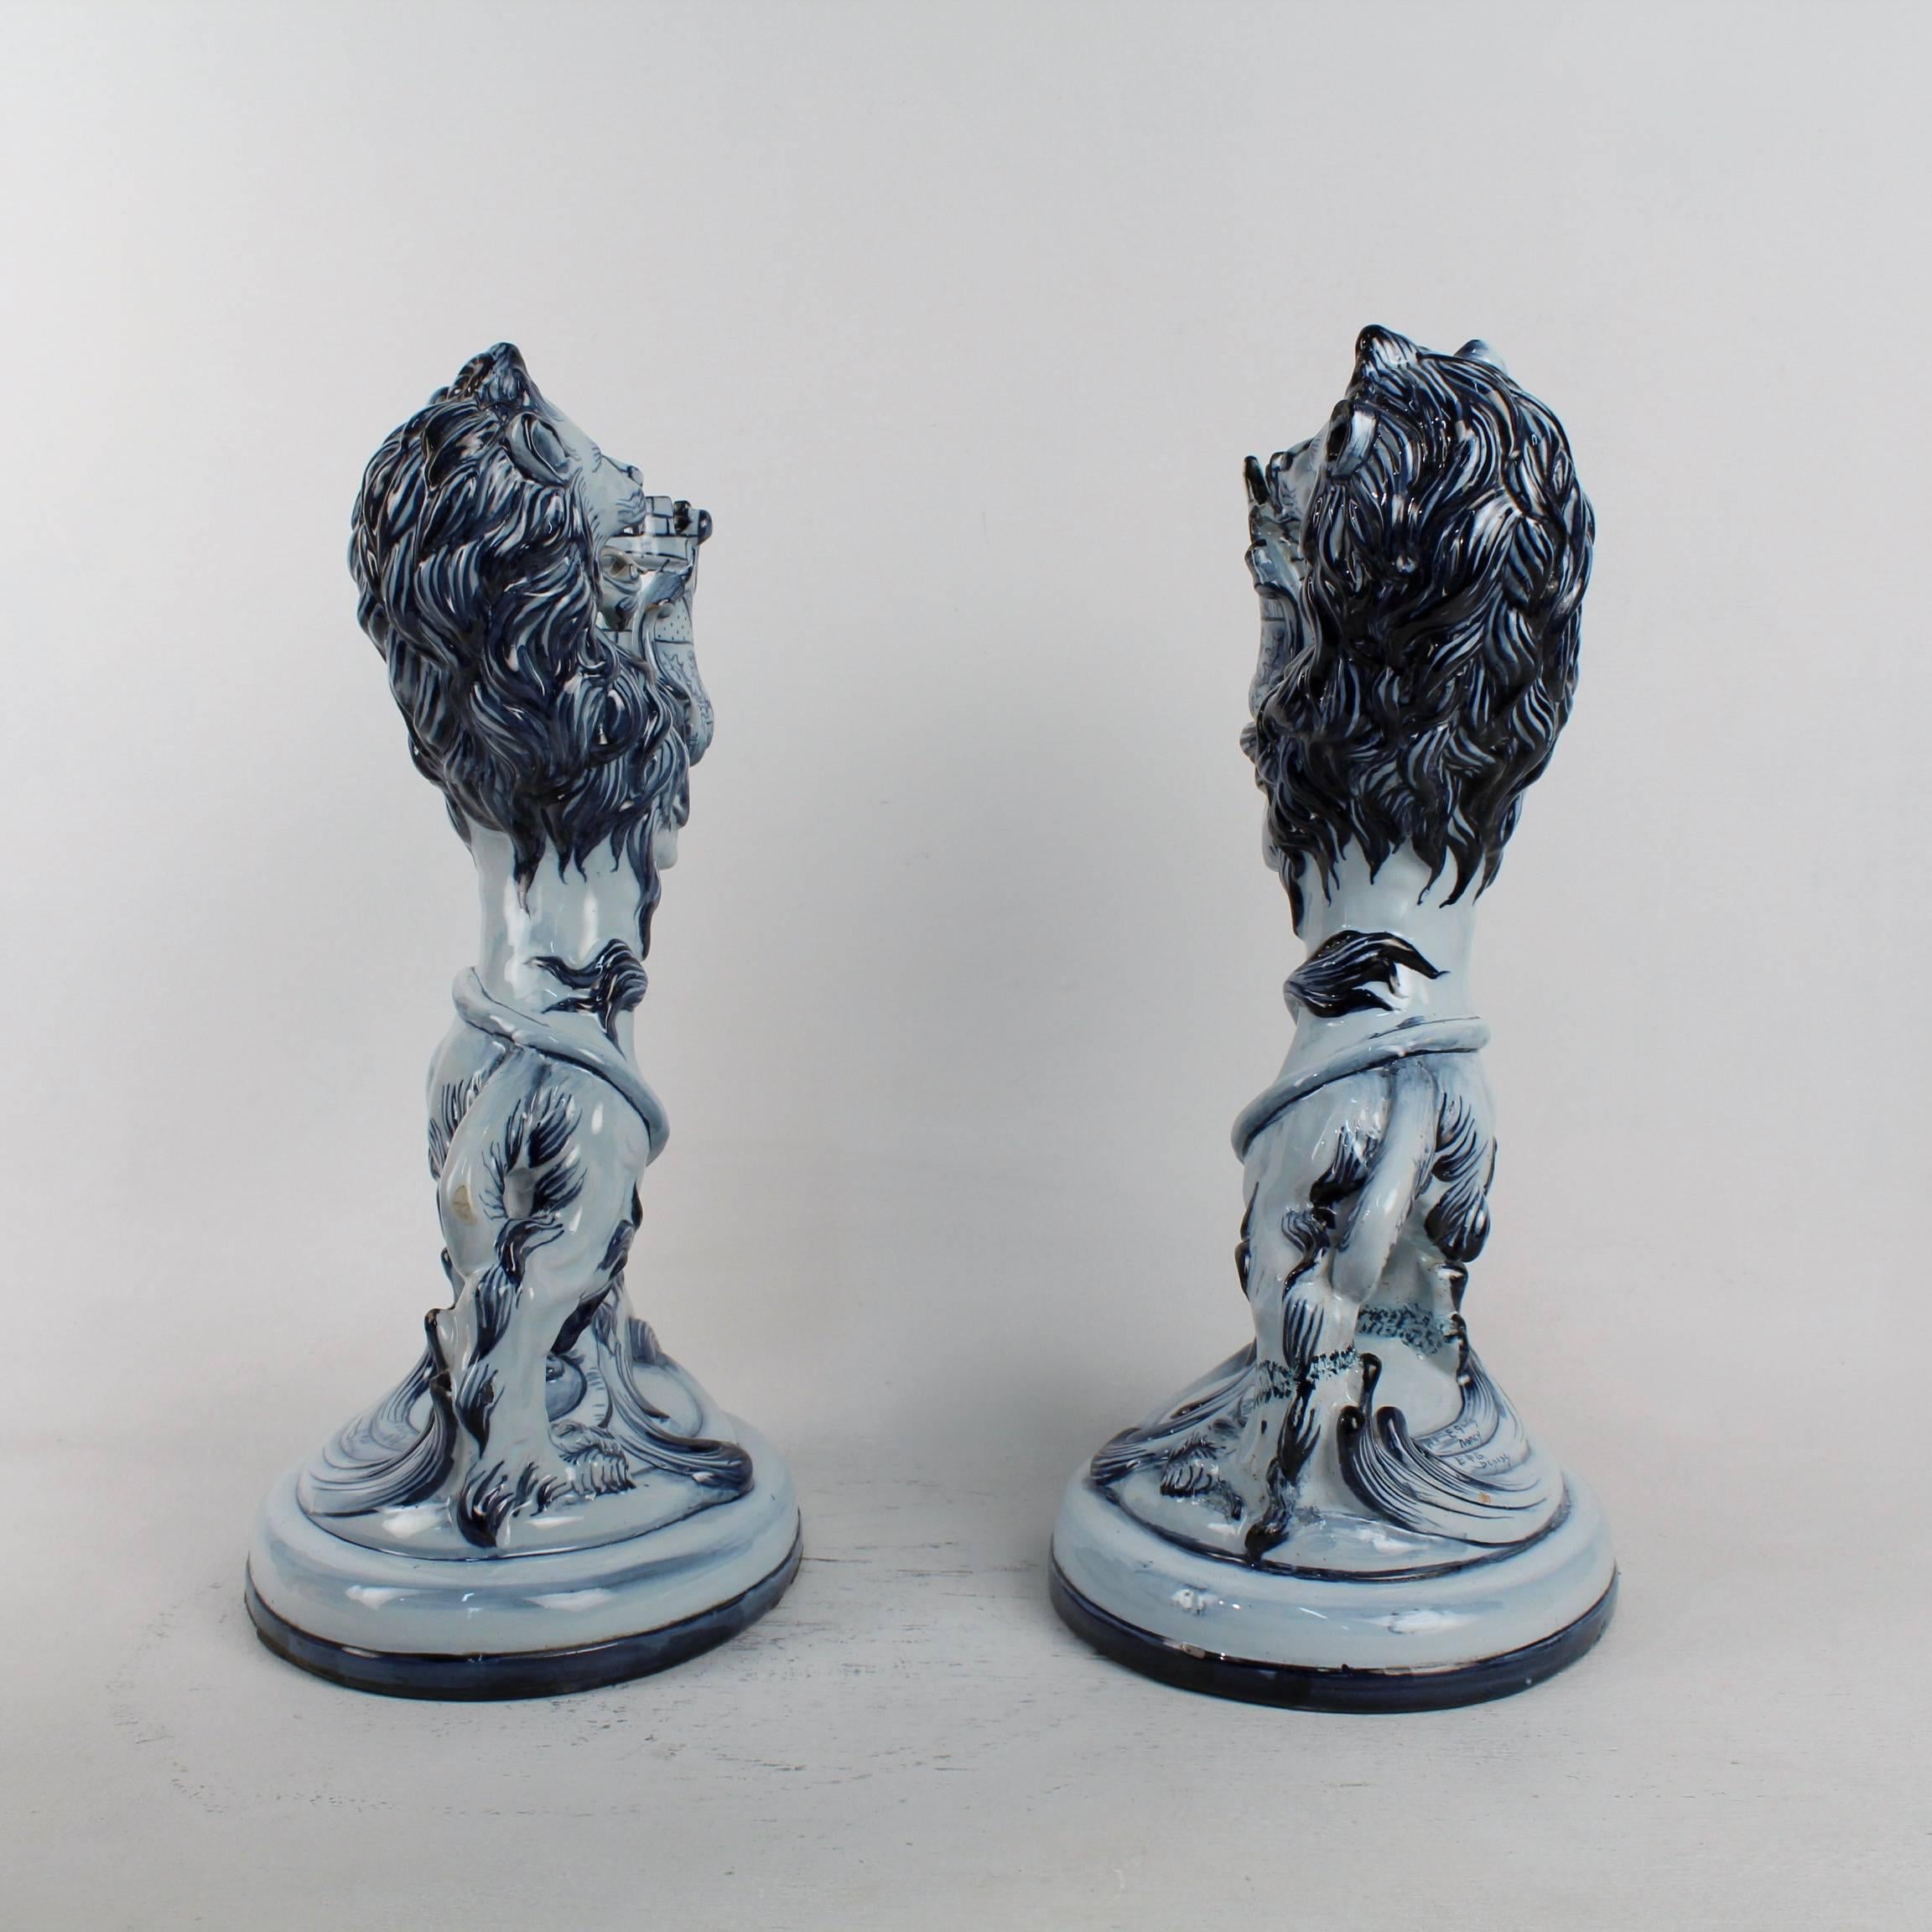 A matched pair of late 19th century Émile Gallé faience lions in blue. 

The lions are modeled standing erect on two feet holding a castle tower in their paws. They can serve as candlesticks, candelabra bases, or mantel garniture pieces.

Each